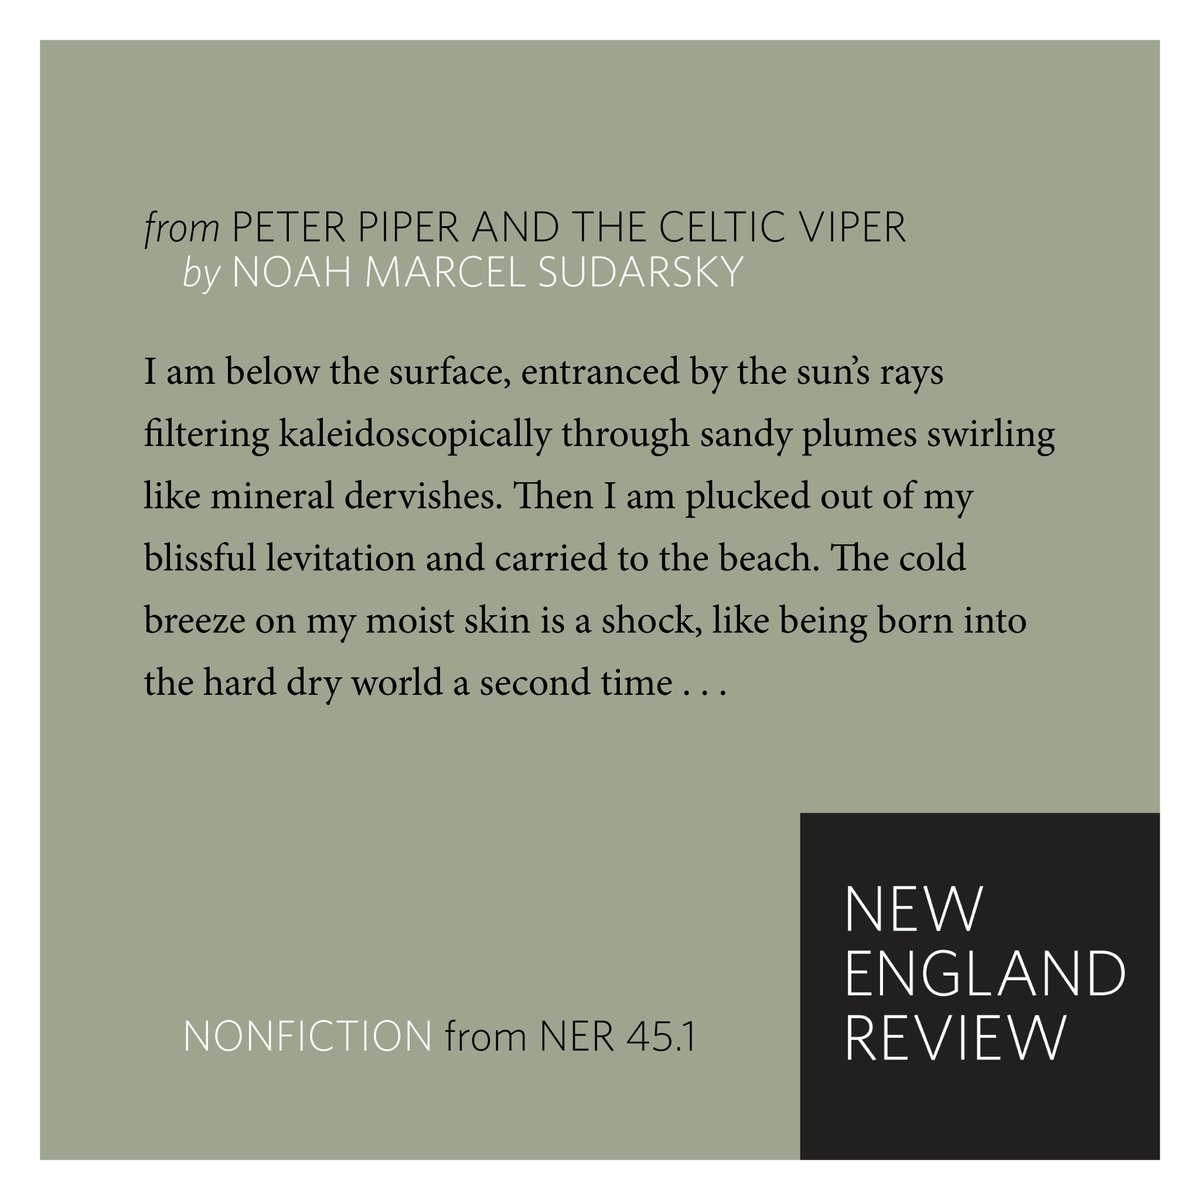 From the essay 'Peter Piper and the Celtic Viper' by Noah Marcel Sudarsky (@Aquasimian), new in our spring issue. To read more, purchase your copy of NER 45.1: bit.ly/NERsubscribenow